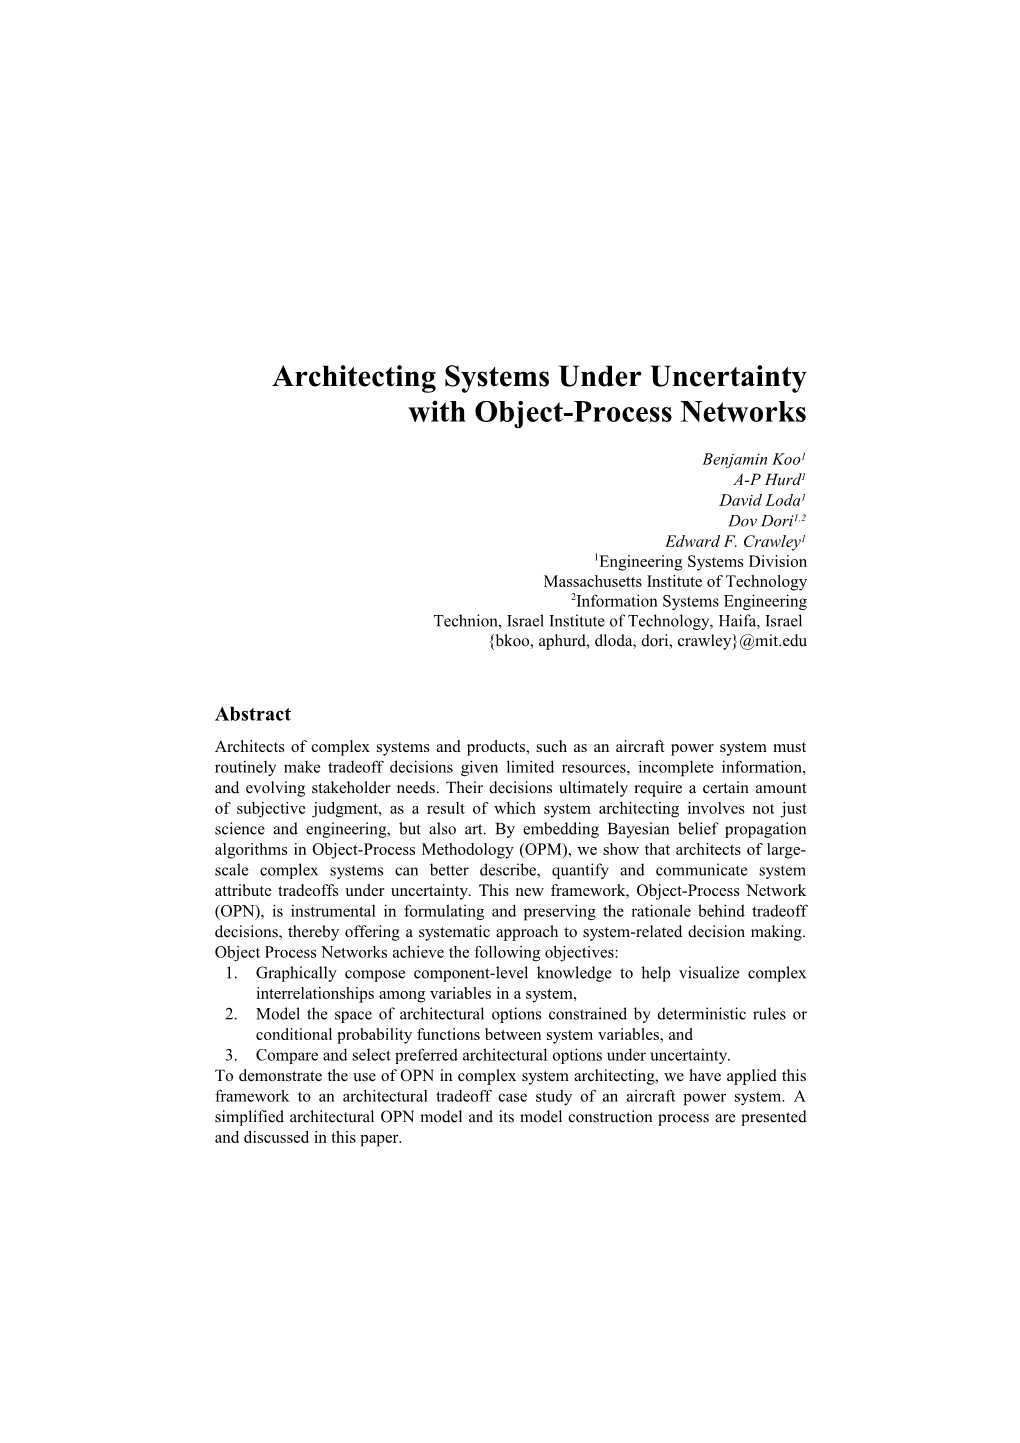 Architecting Systems Under Uncertainty with Object-Process Networks